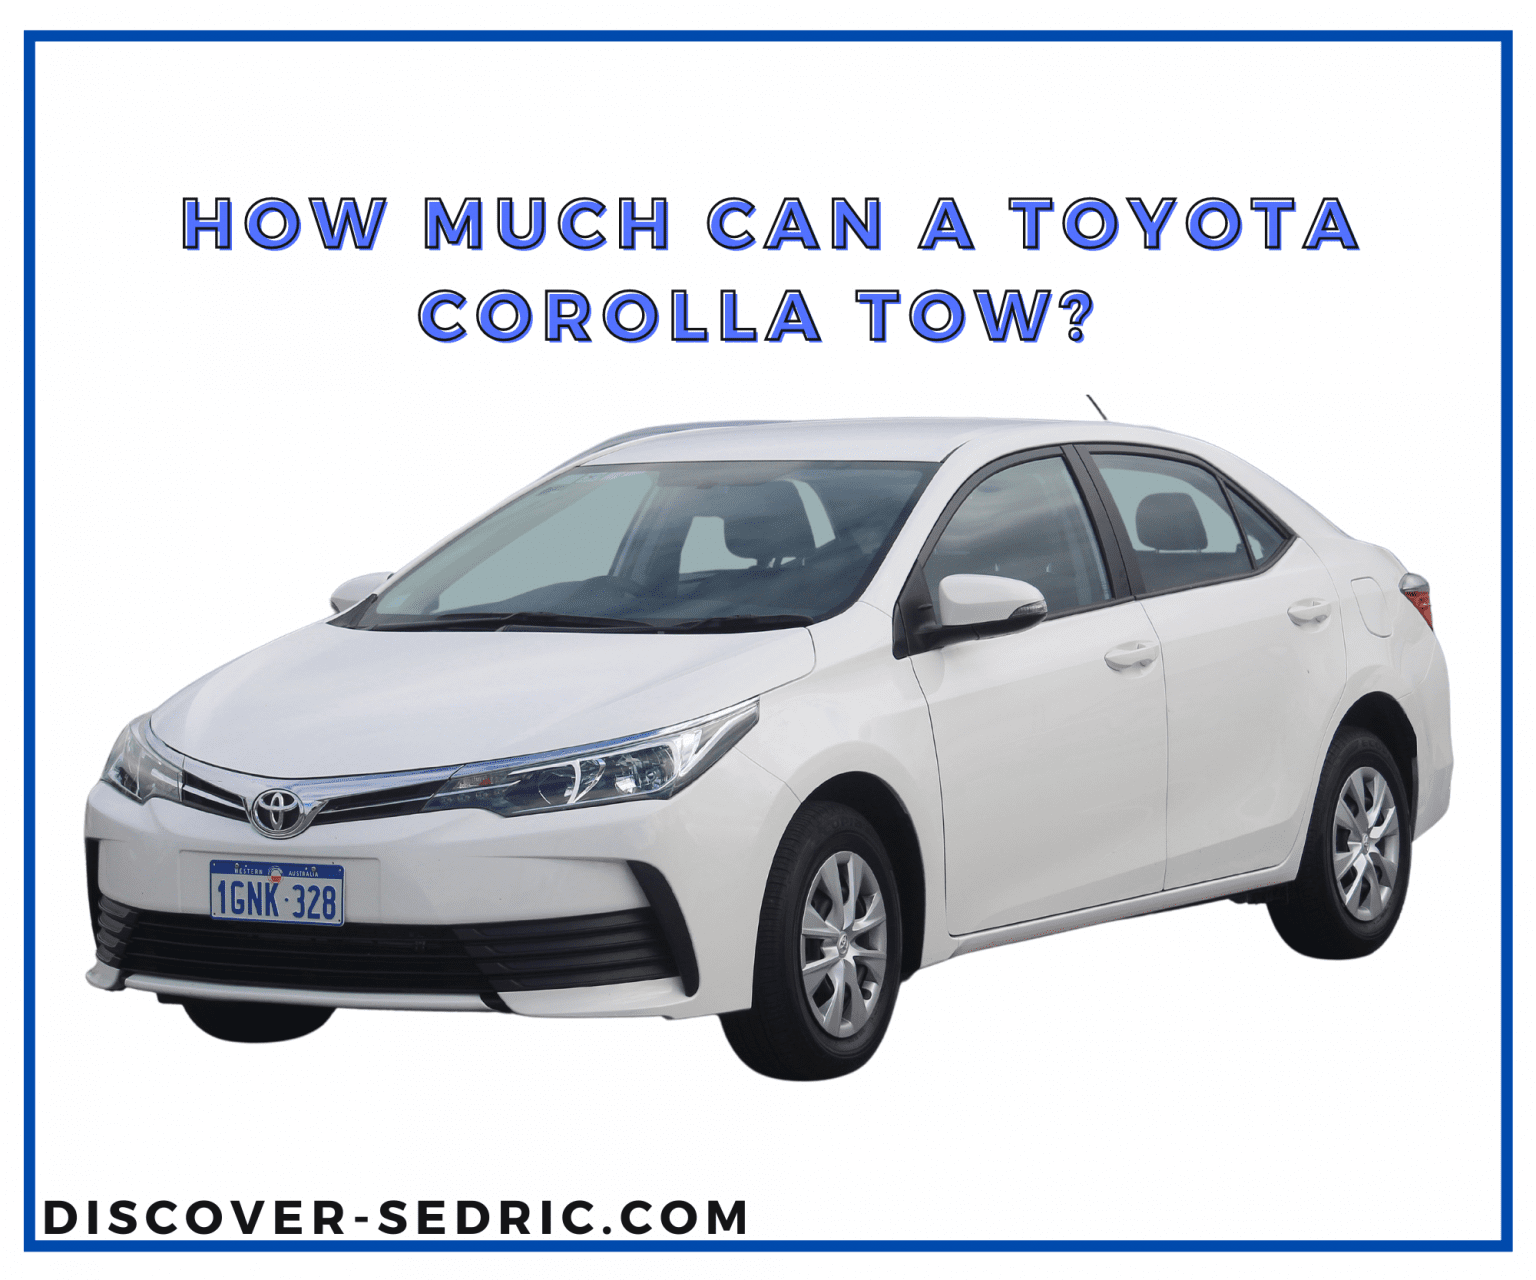 How Much Can A Toyota Corolla Tow? [Answered]